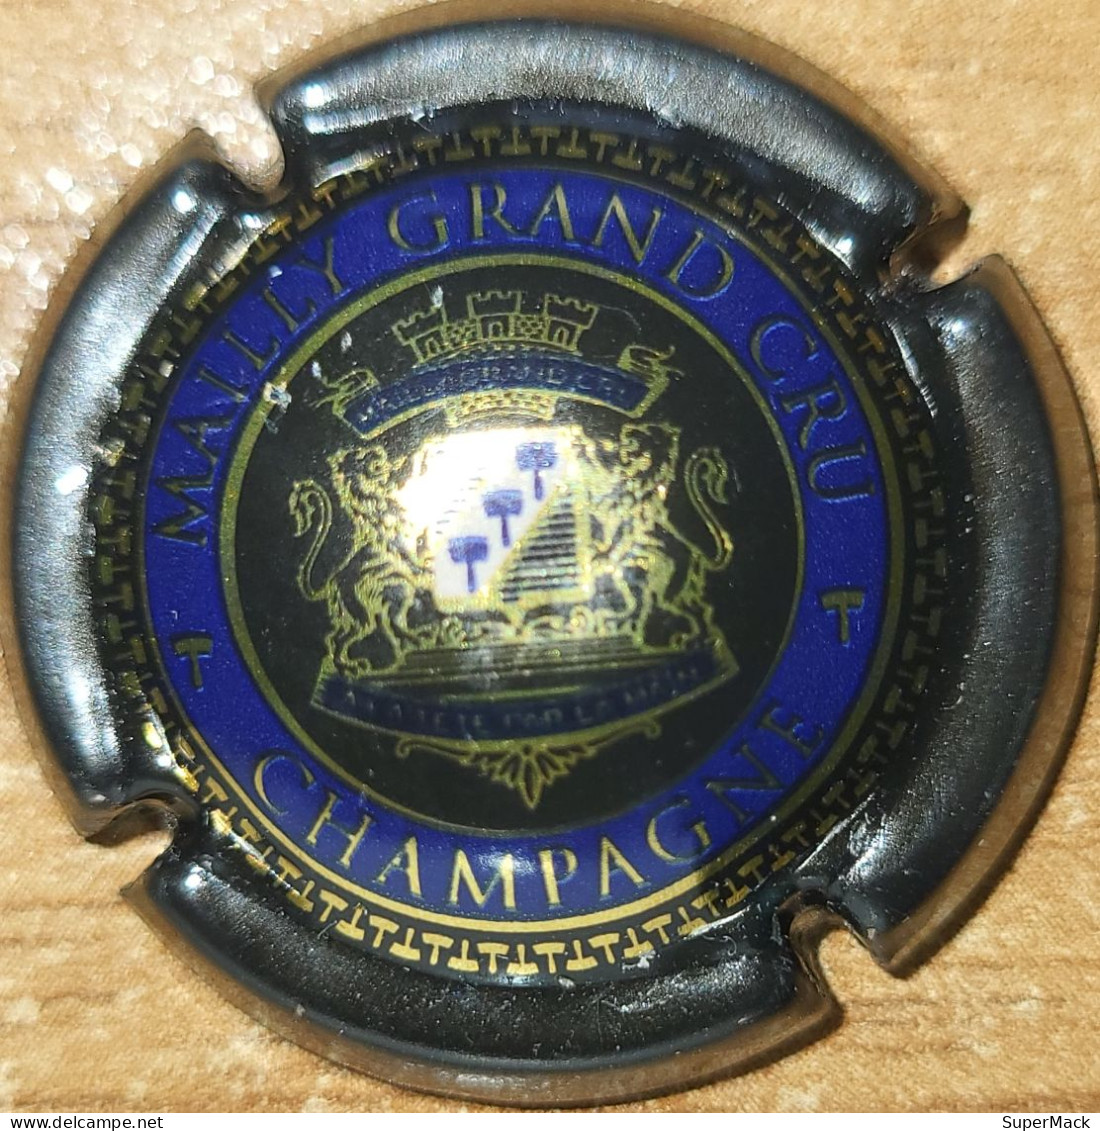 Capsule Champagne MAILLY GRAND CRU Série Mailly Grand Cru En Circulaire, Cercle Bleu Foncé & Or Nr 12f - Mailly Champagne